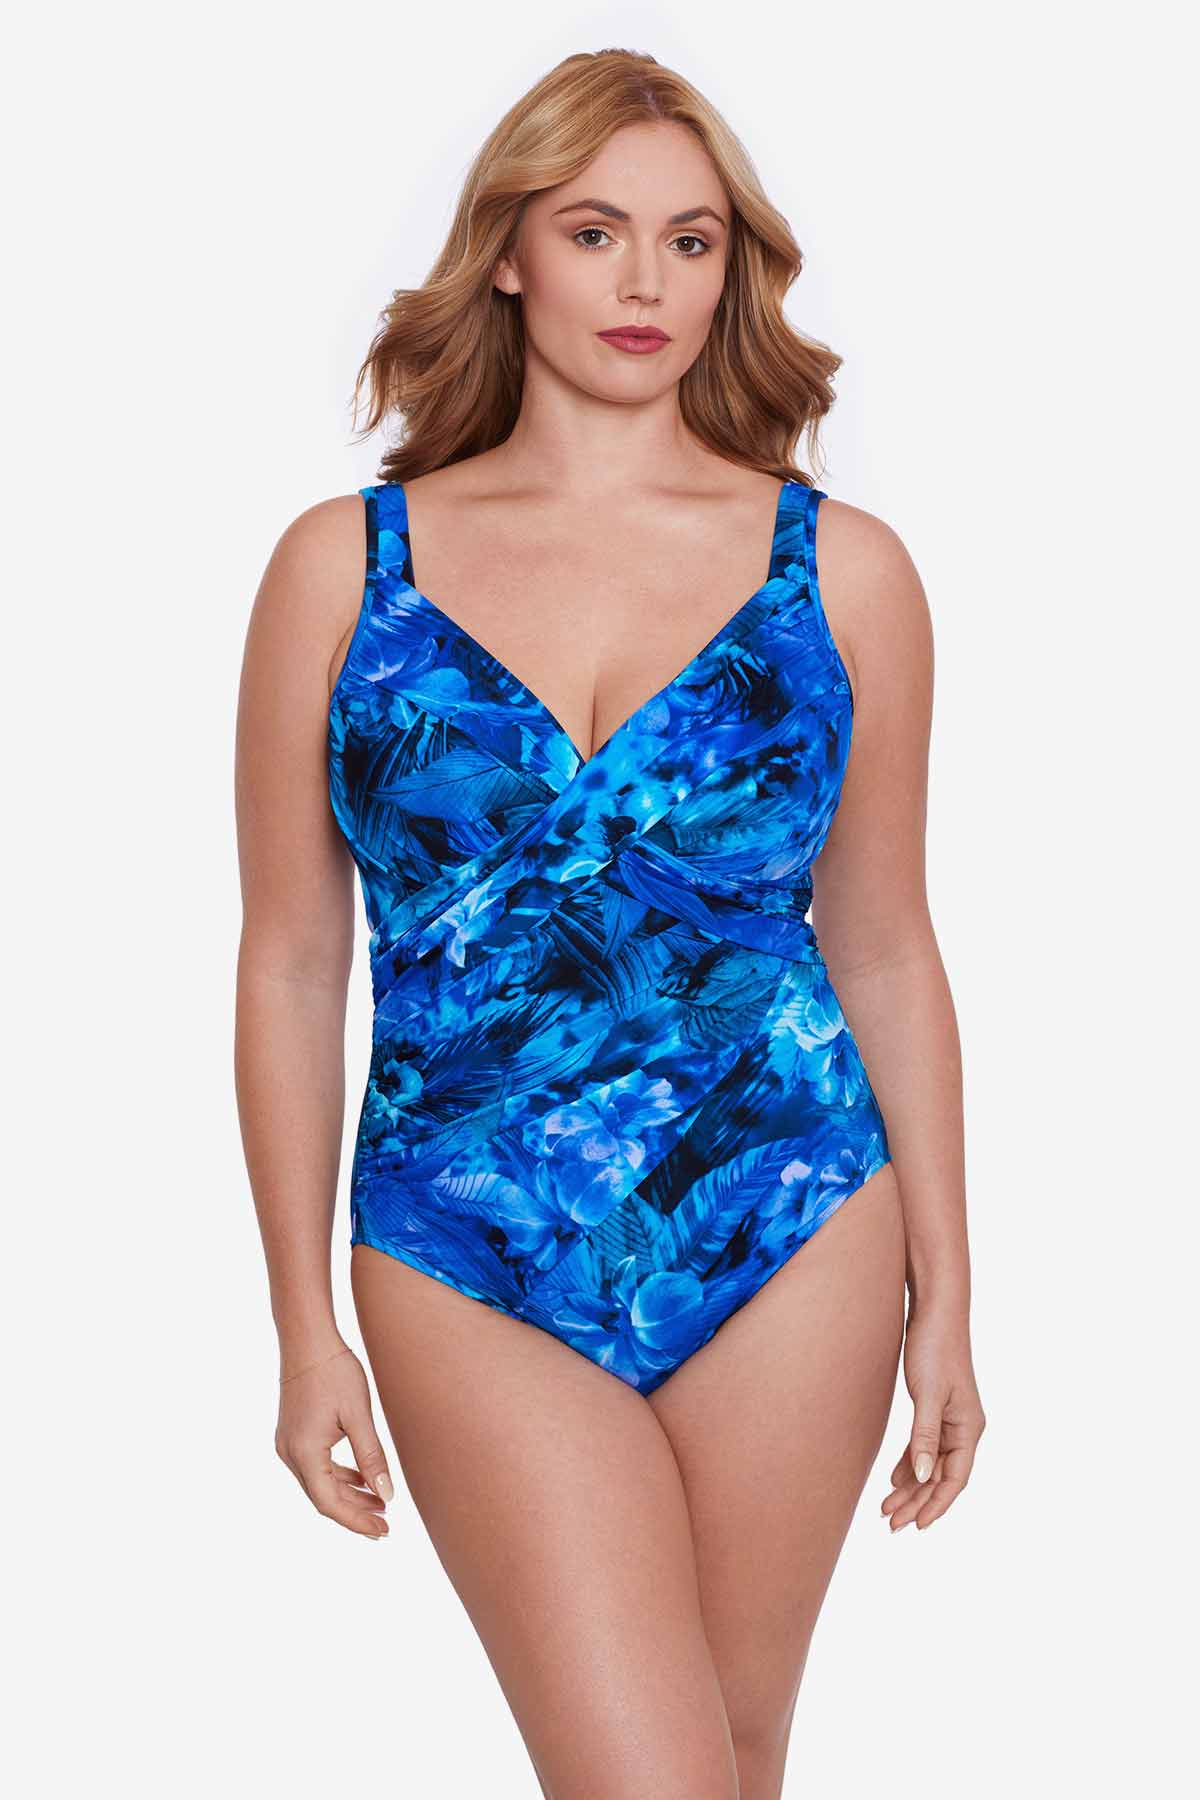 Miraclesuit: One Piece Tamara Tigre It's A Wrap Swimsuit